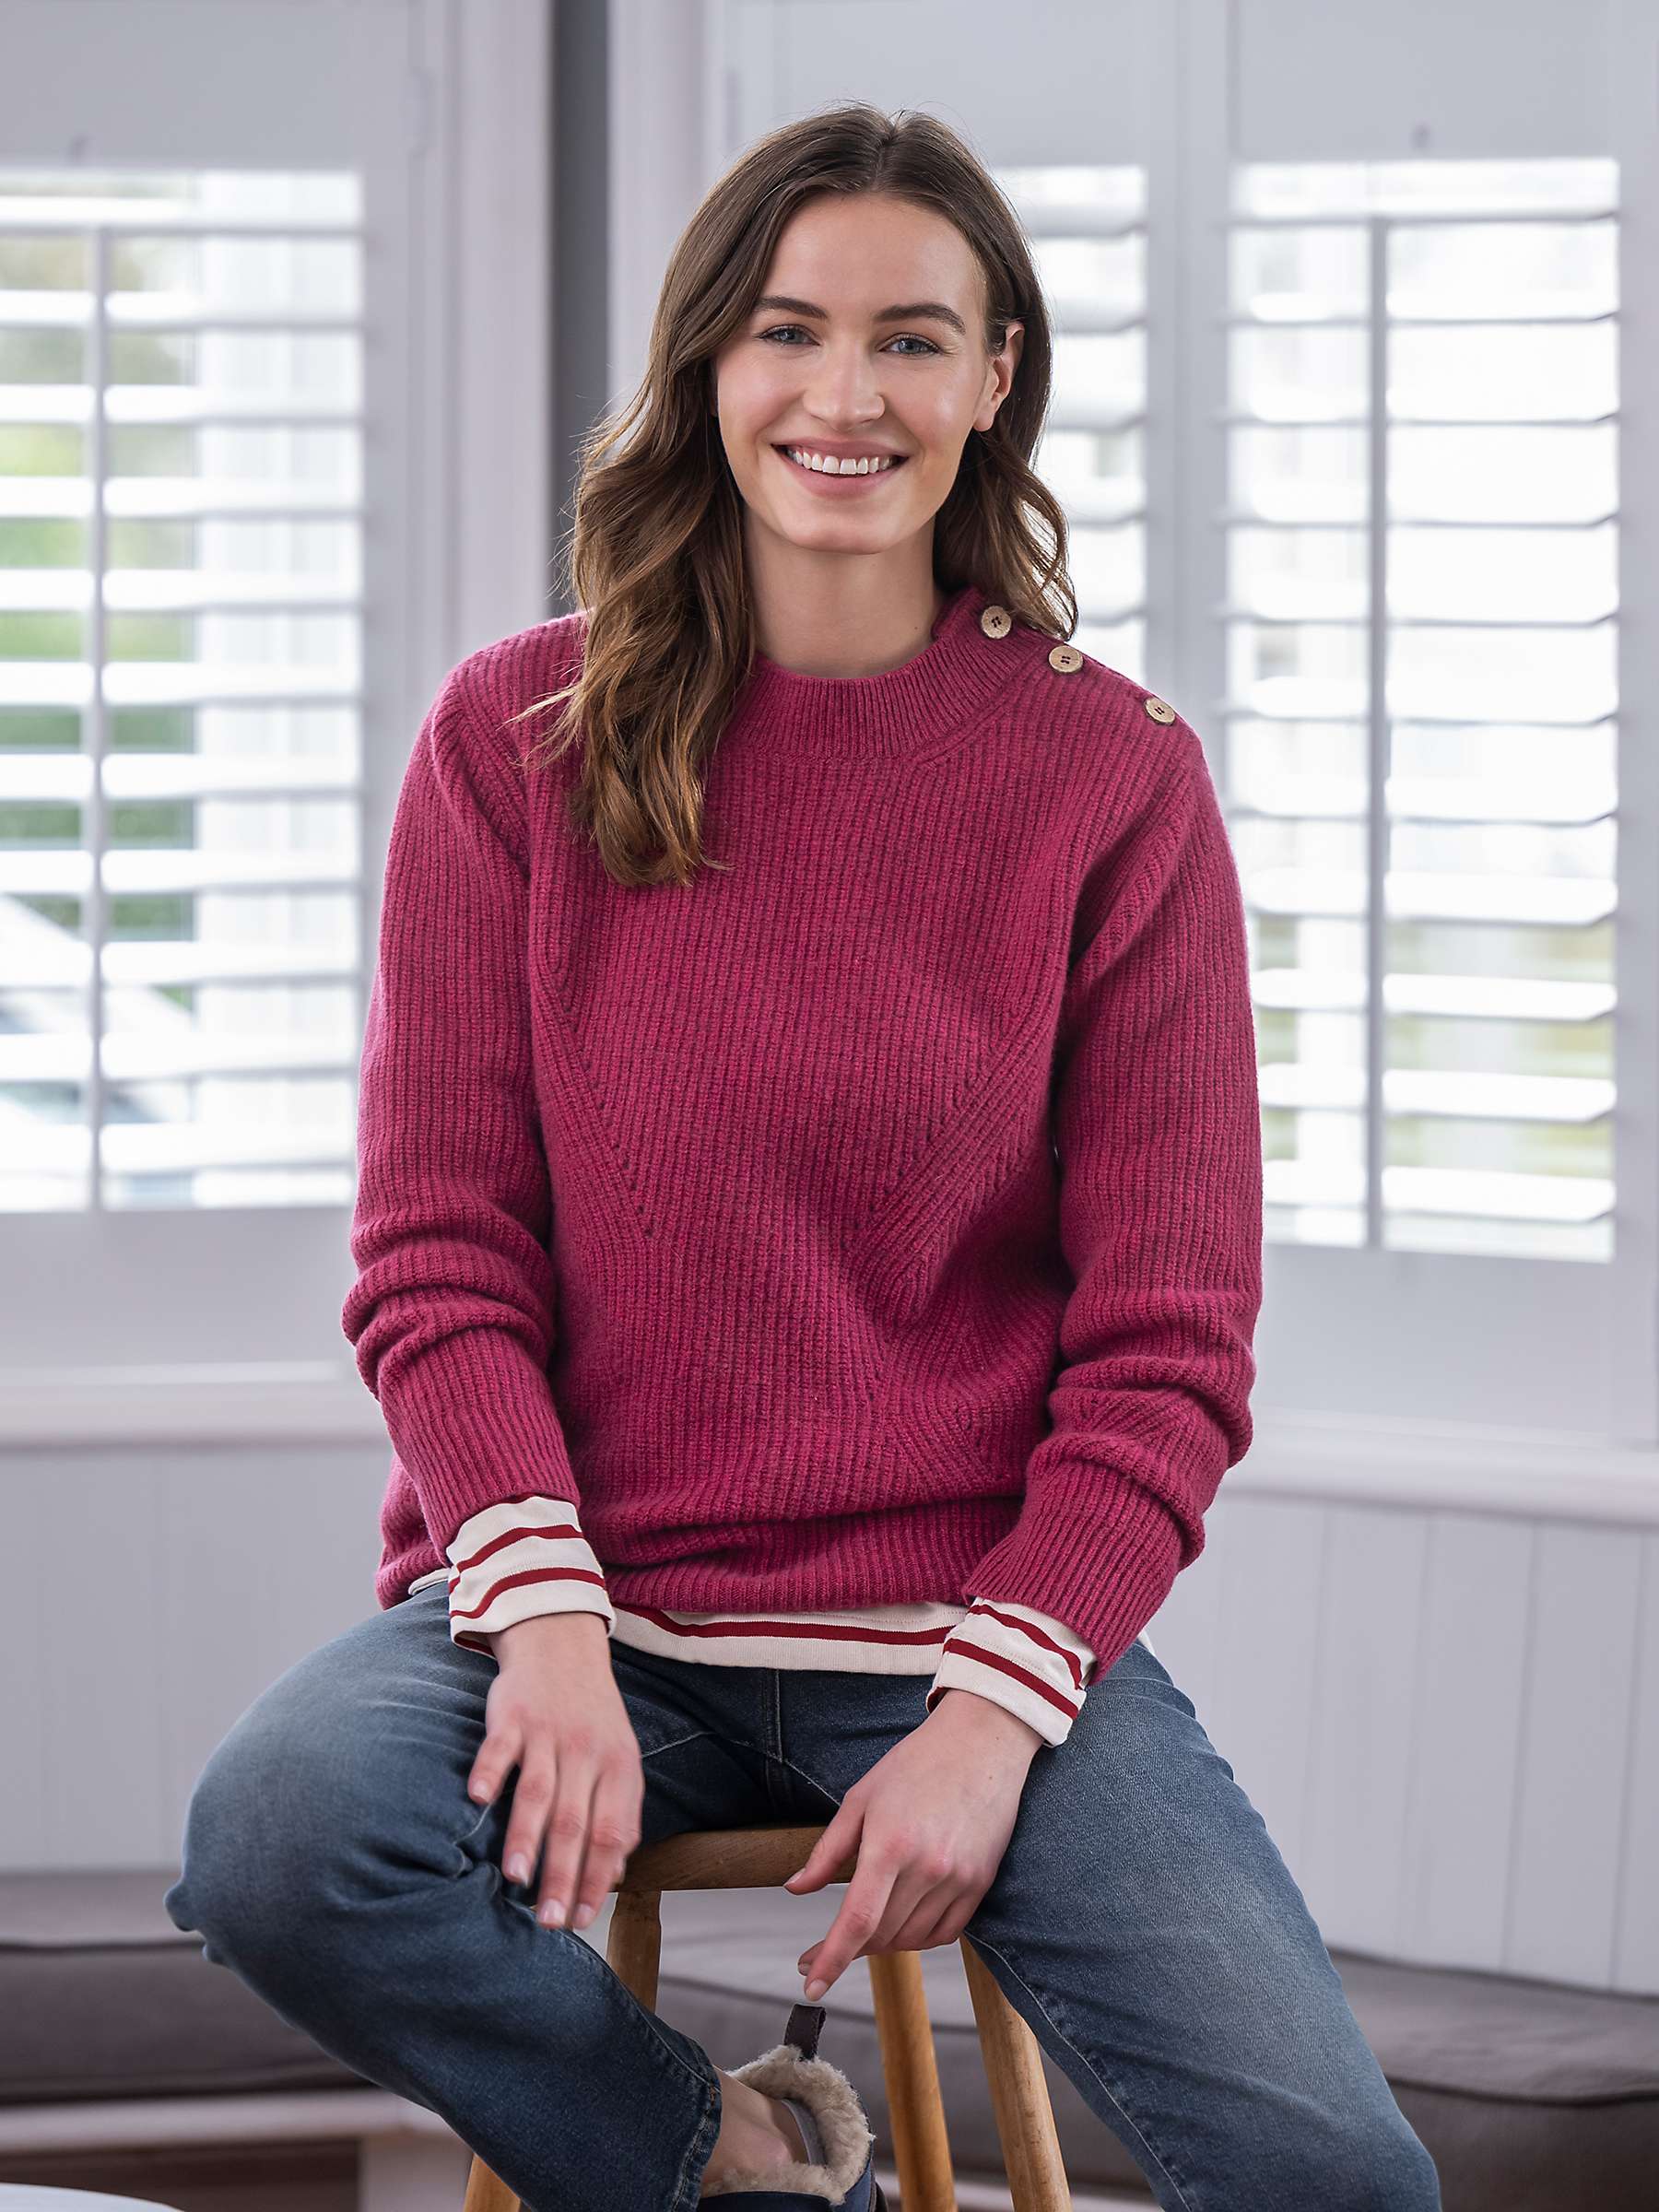 Buy Celtic & Co. Ribbed Lambswool Button Neck Jumper, Anemone Online at johnlewis.com